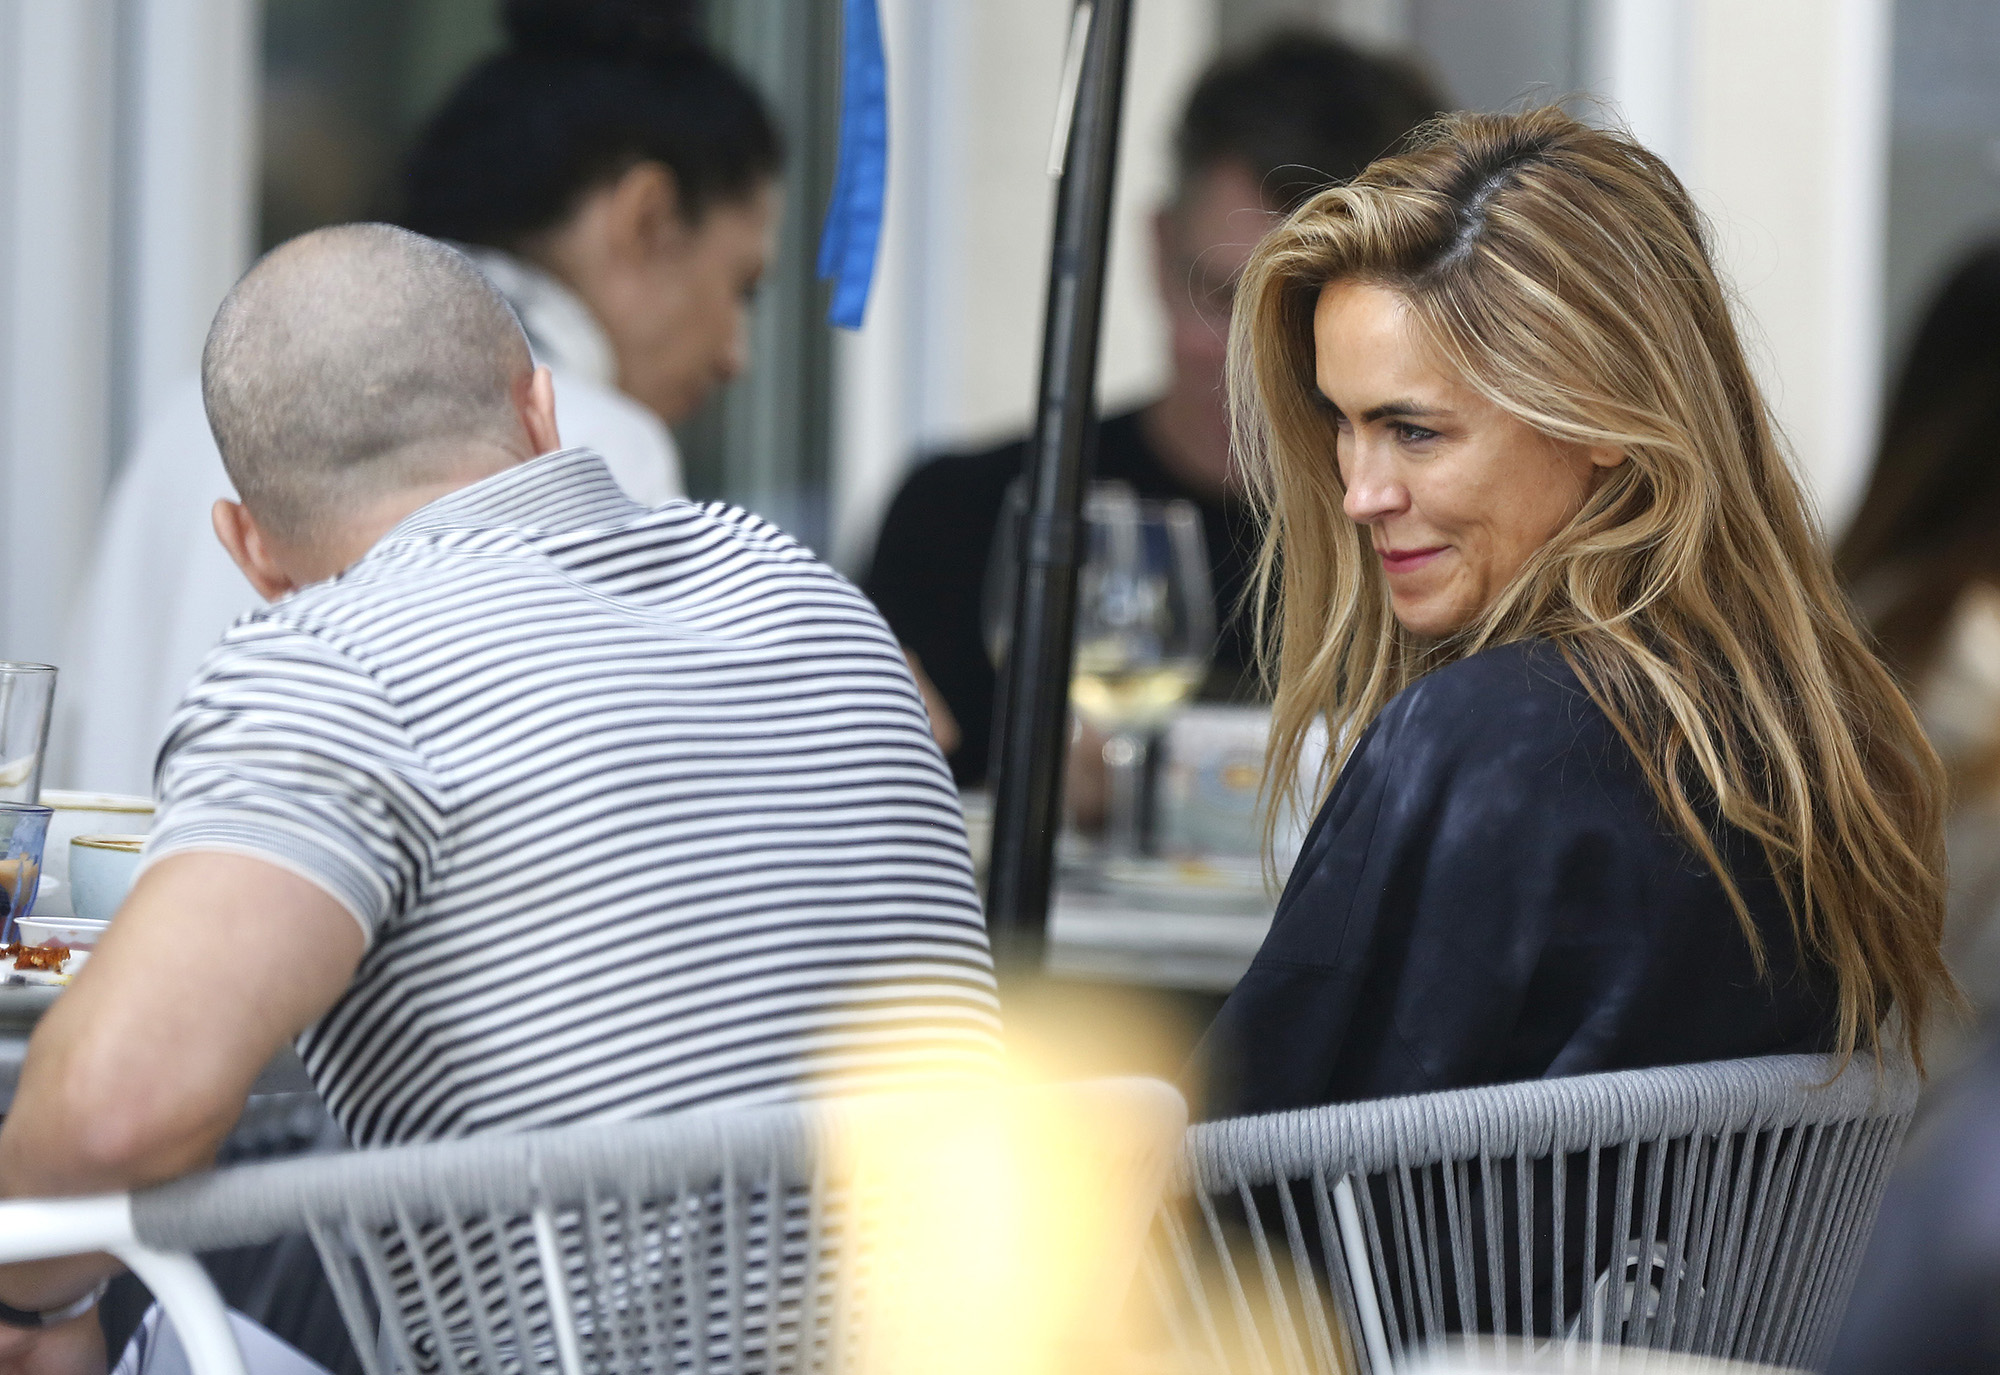 EXCLUSIVEPhoto Credit: MOVI Inc.  November 9th 2021Chrishell Stause and Jason Oppenheim loved up in L.A! The 'Selling Sunset' pair's relationship still seems to be going strong as the pair cuddle and kiss during an alfresco lunch in West Hollywood,C